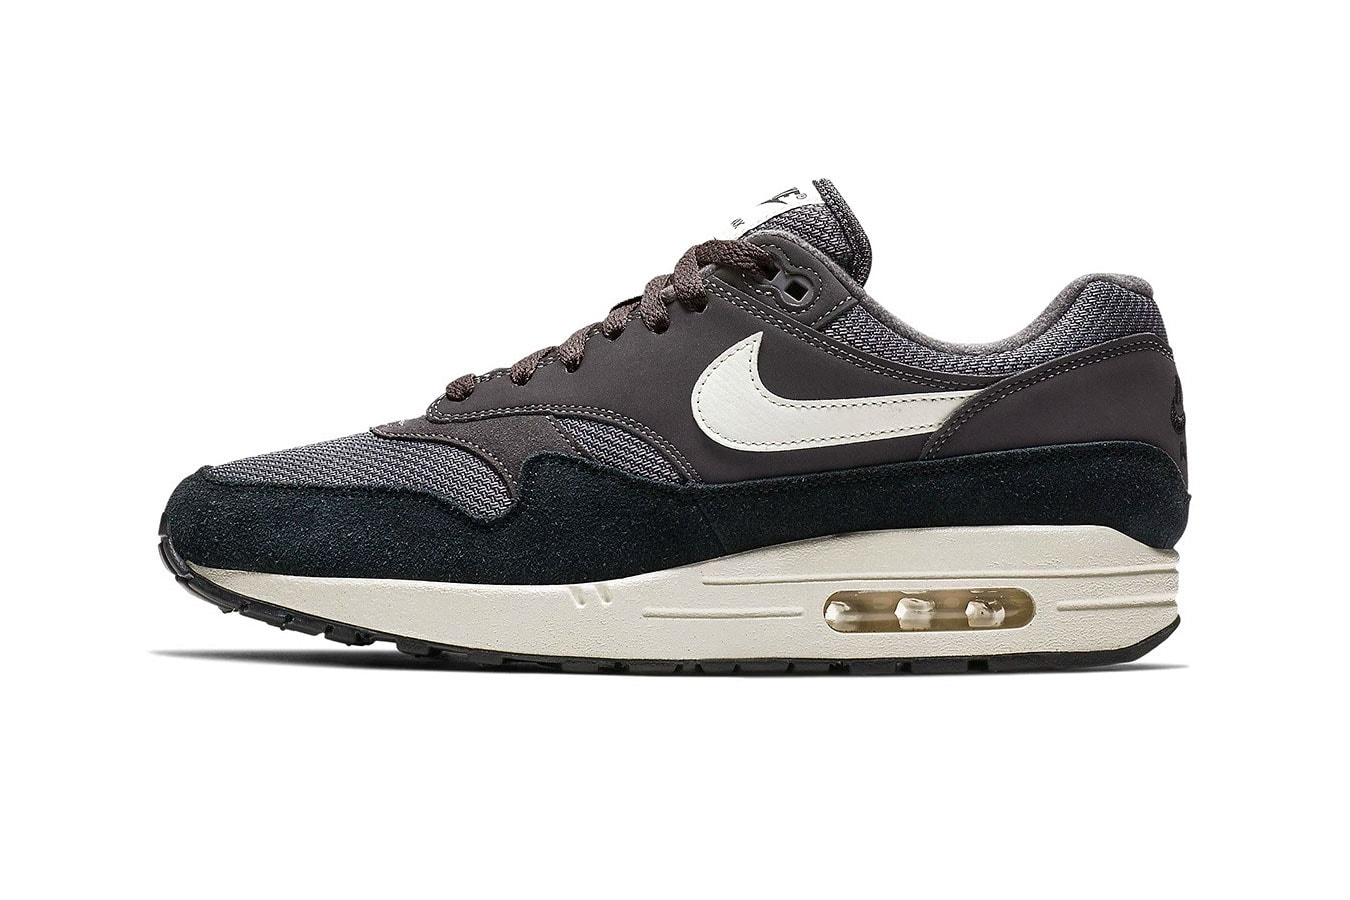 Nike Air Max 1 "Thunder Grey" release date info price colorway suede mesh sneaker size purchase online sail black official imagery